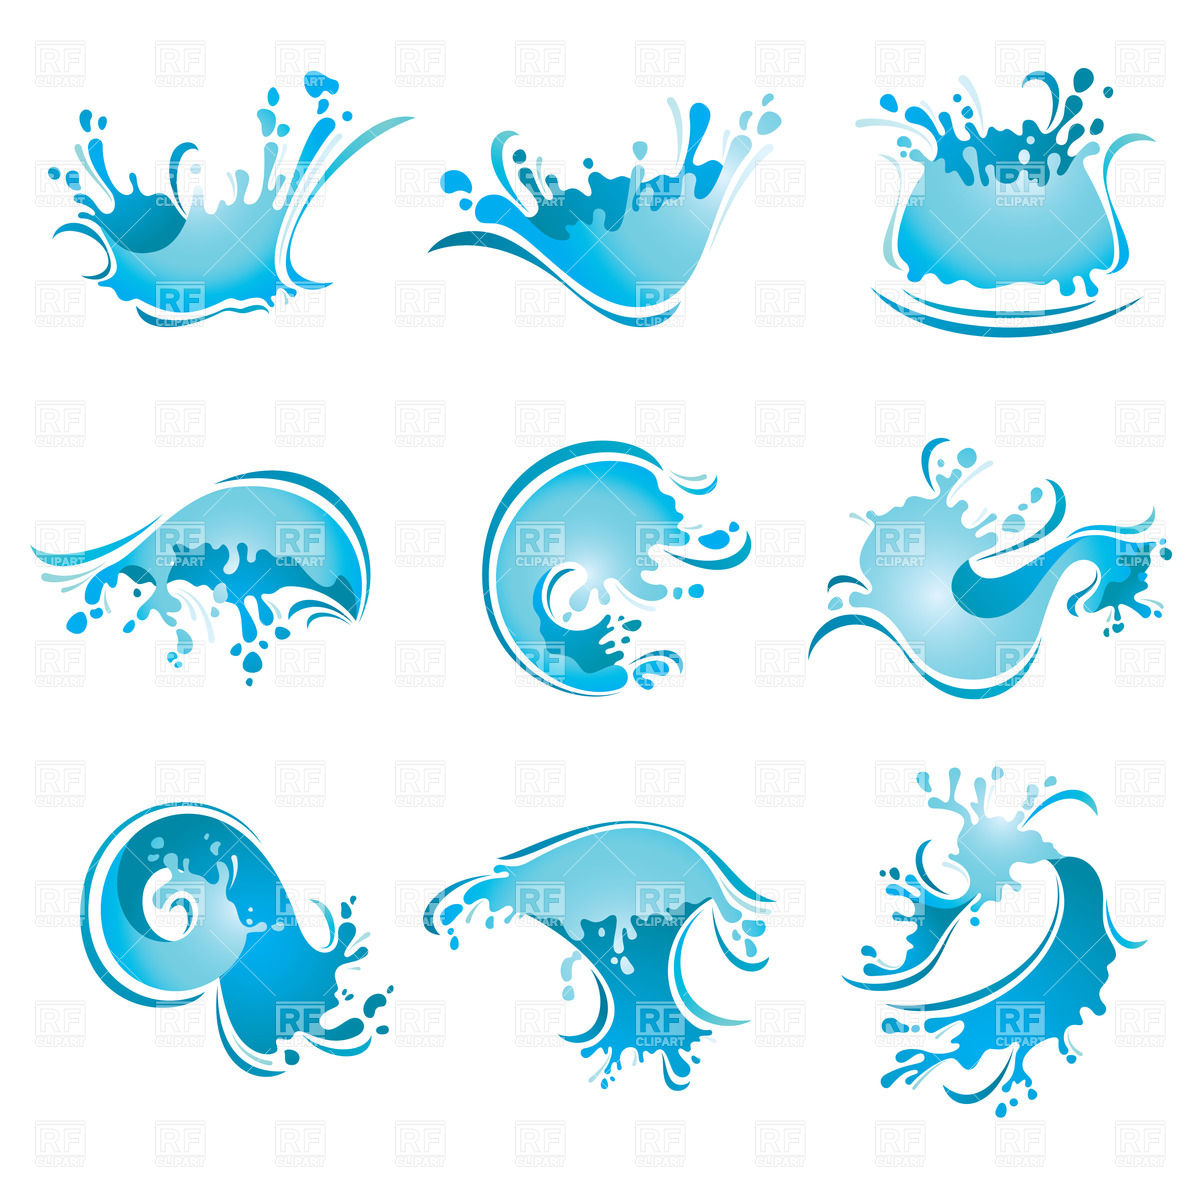 15 Photos of Waves Vector Free Download